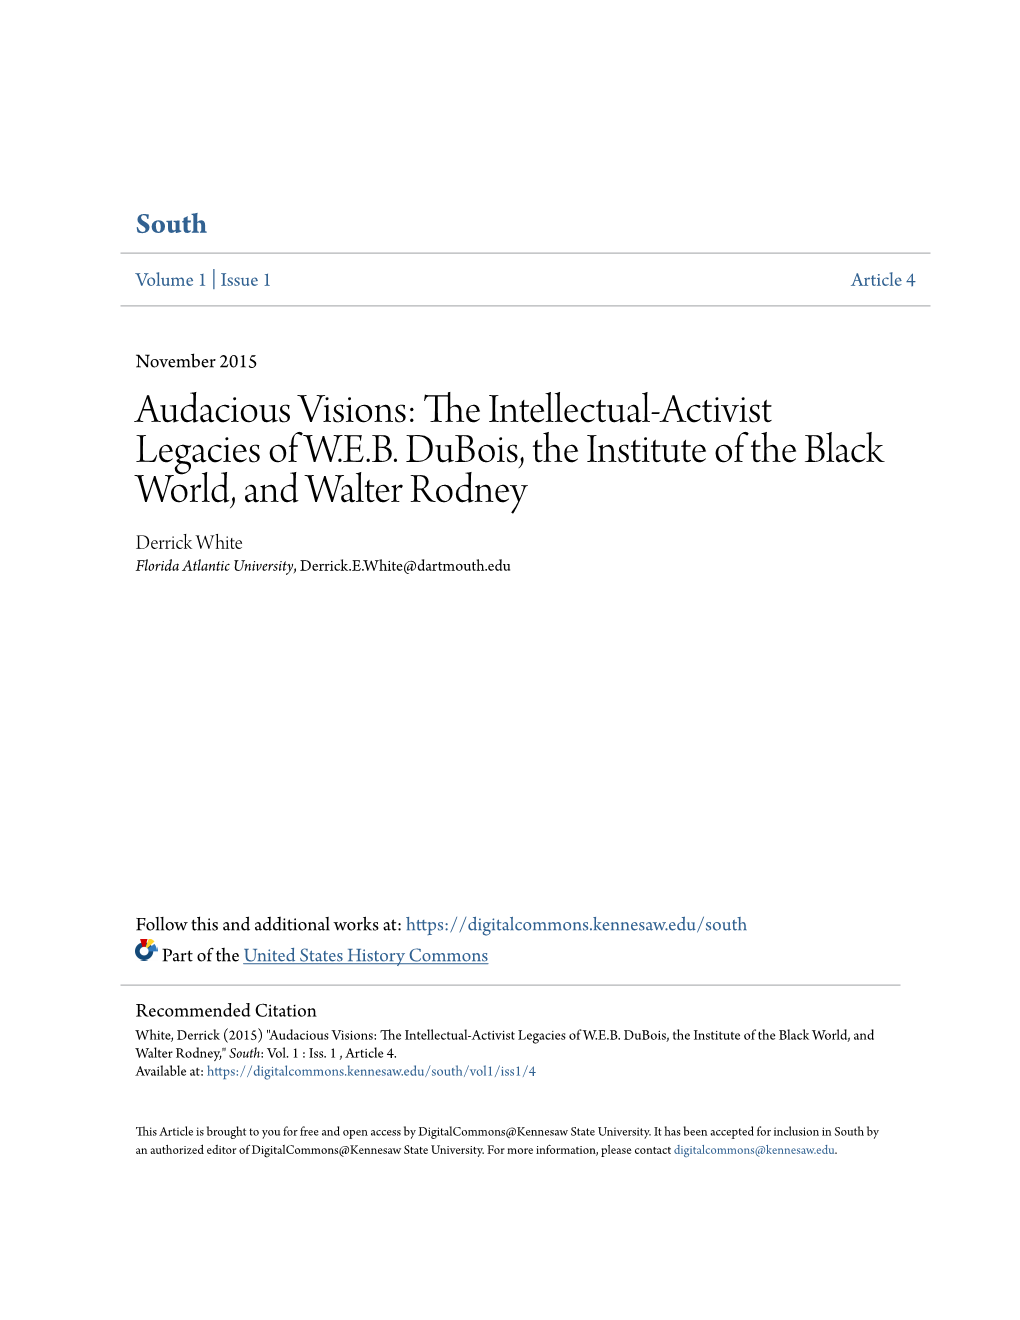 The Intellectual-Activist Legacies of WEB Dubois, the Institute of The